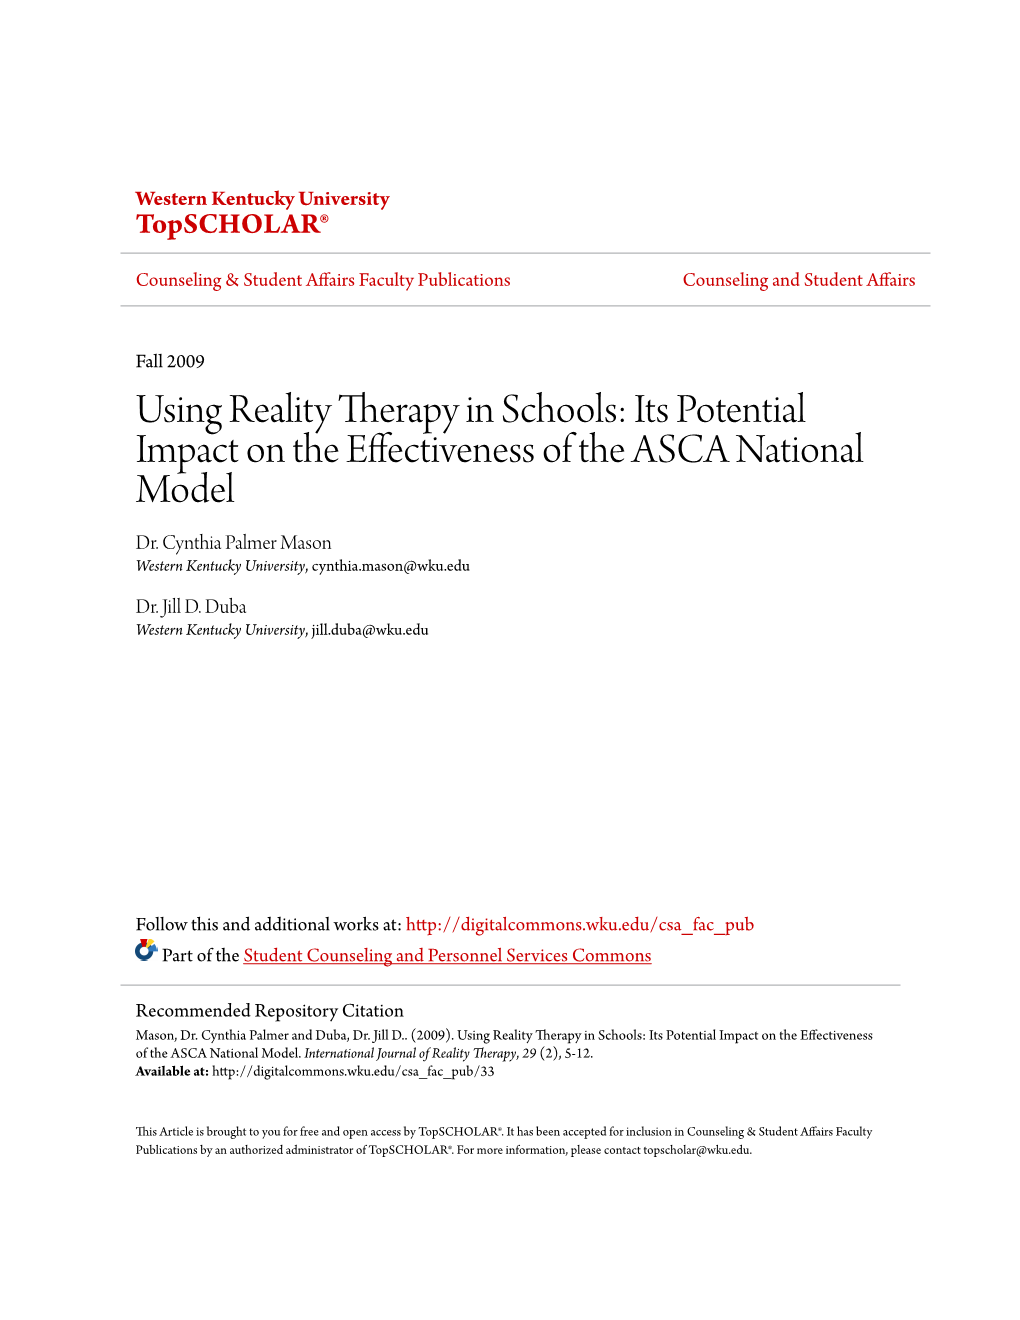 Using Reality Therapy in Schools: Its Potential Impact on the Effectiveness of the ASCA National Model Dr